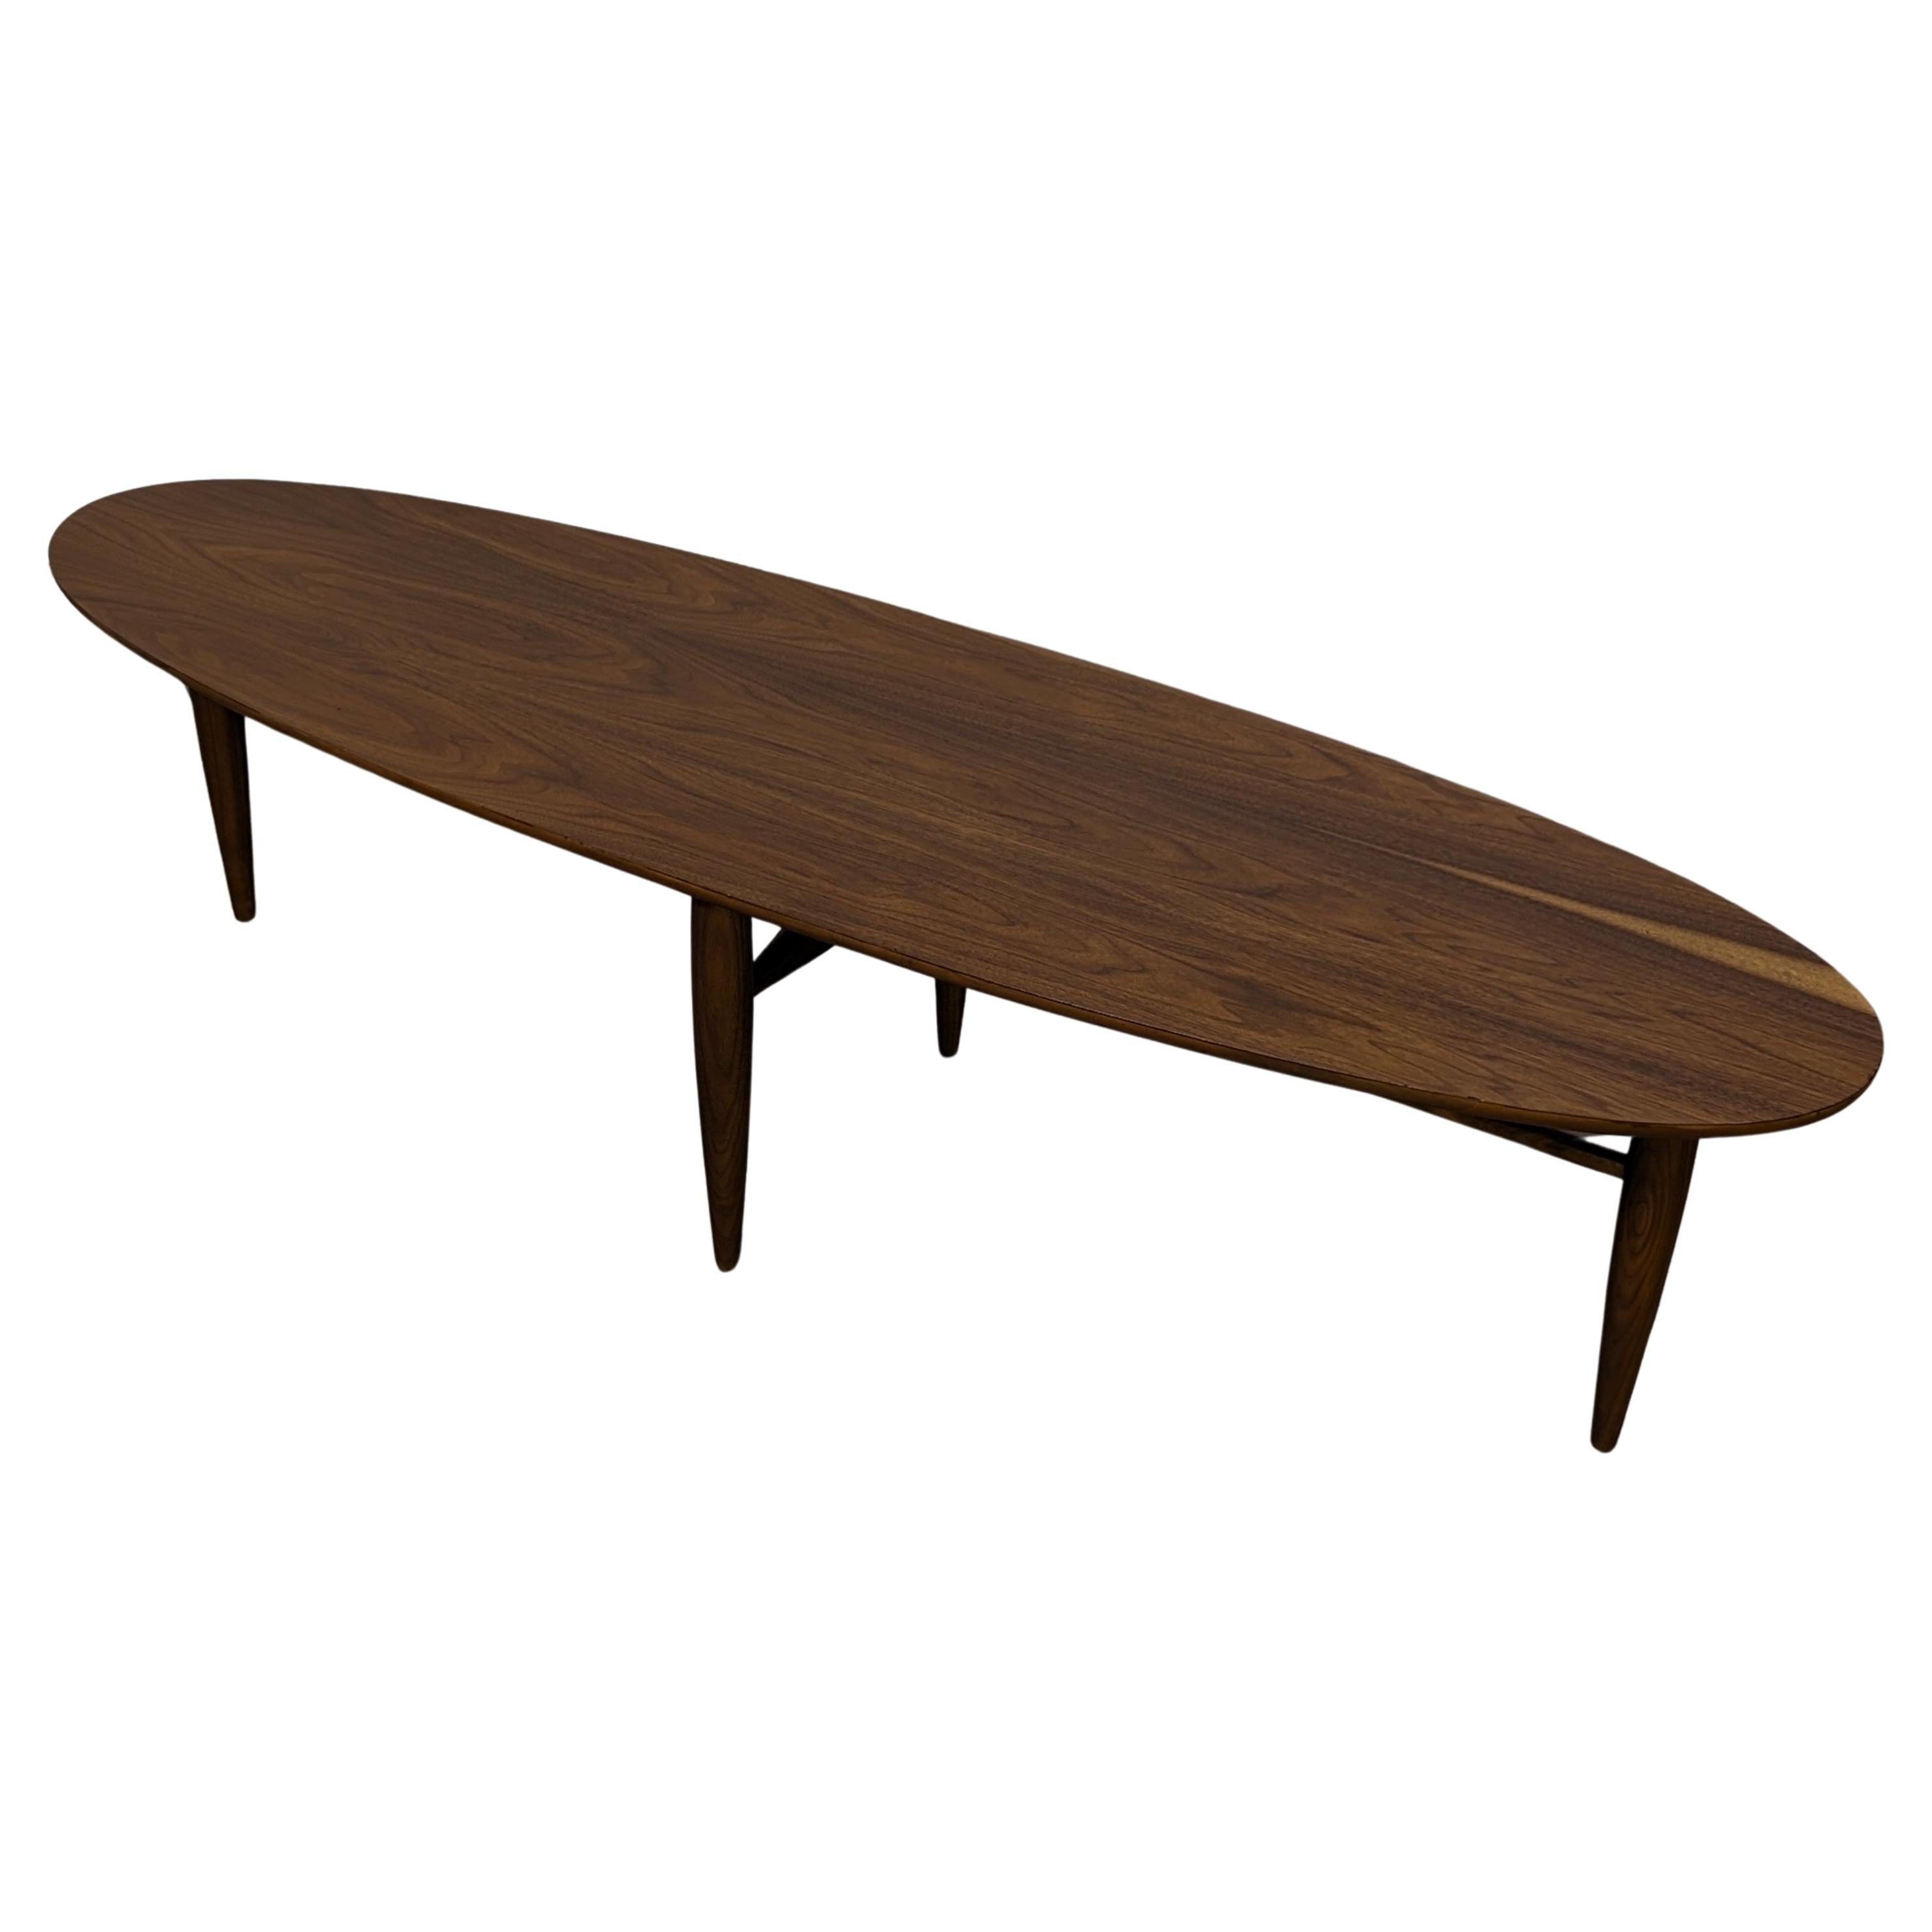 Mid Century Modern Surfboard Coffee Table by Mersman, c1960s For Sale